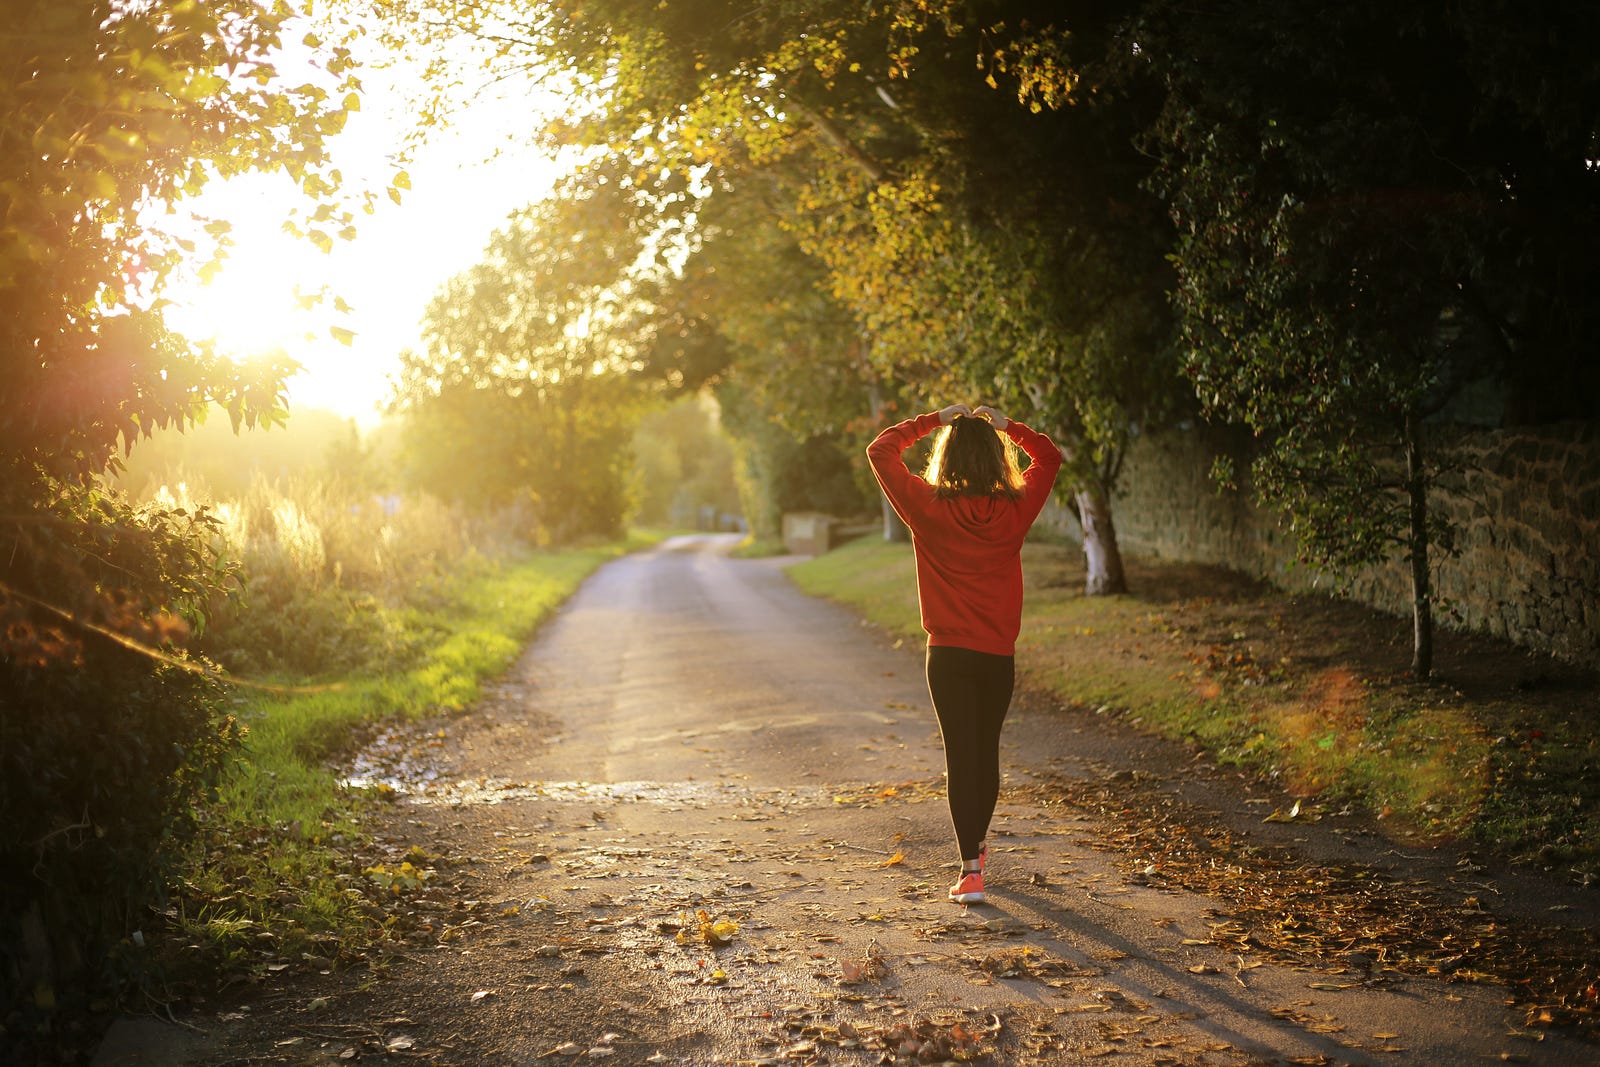 A woman walks away from us, sun ablaze in the background left. She walks along a slightly woodsy road.Among those with clinically significant weight loss, 78 percent reported exercising. For the group without weight loss, 63 percent did exercise.